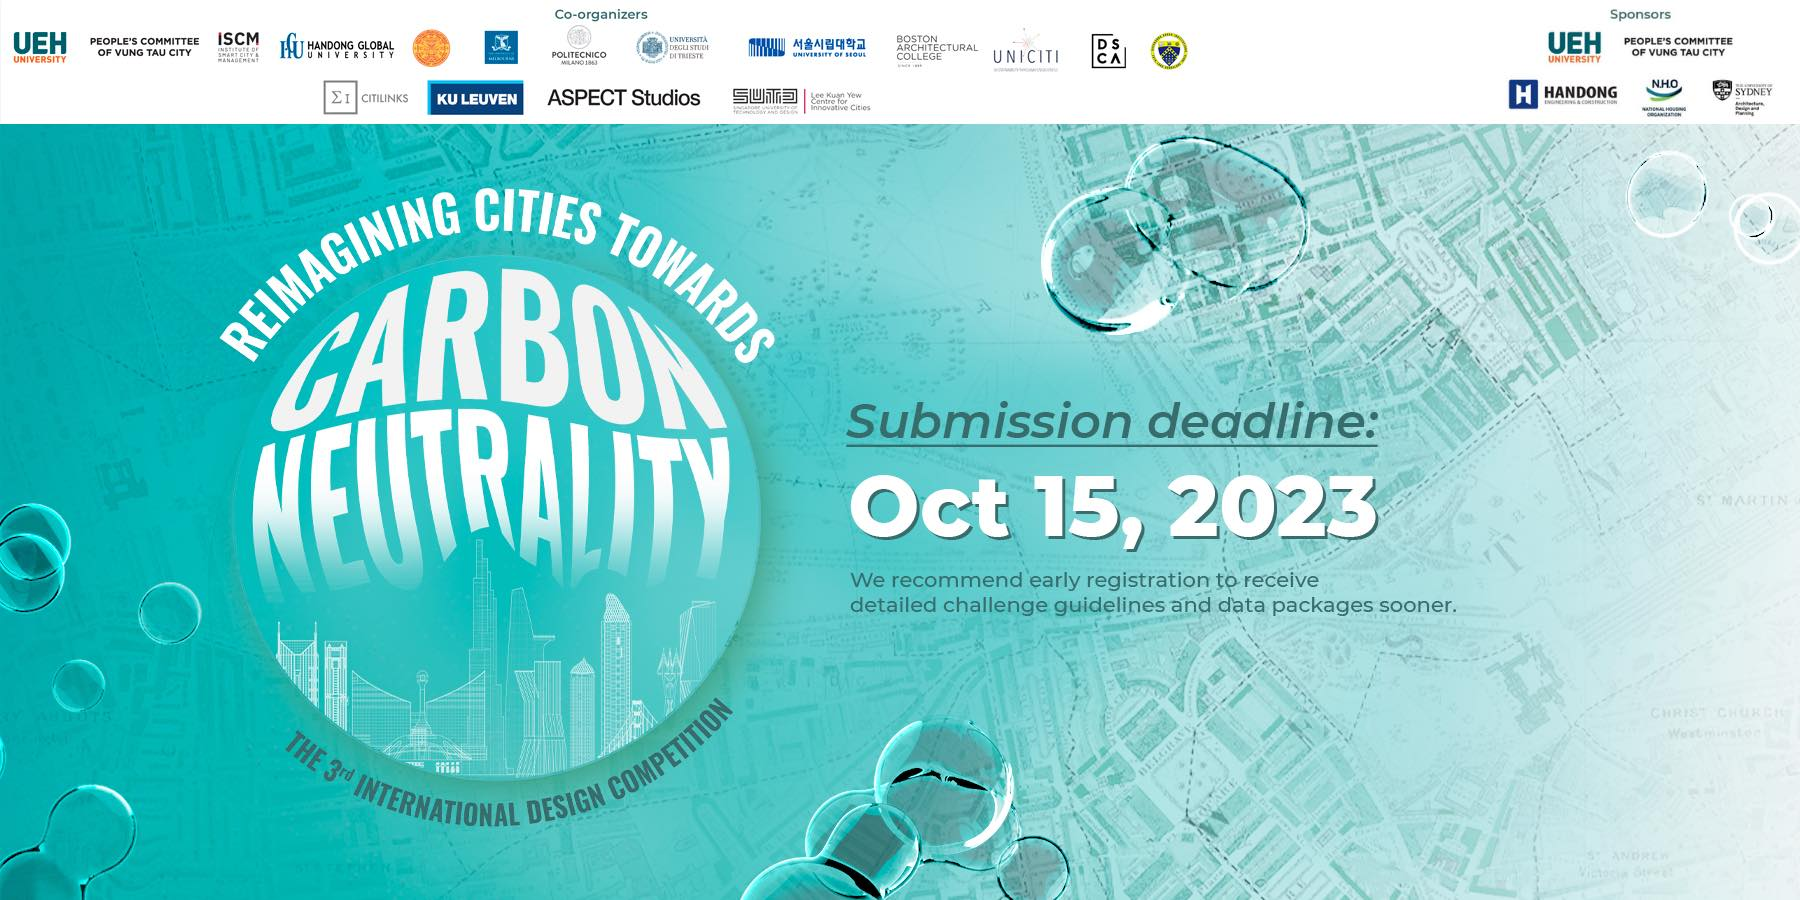 THERE IS LESS THAN 90 DAYS LEFT TO THE SUBMISSION DEADLINE OF THE THIRD INTERNATIONAL DESIGN COMPETITION: REIMAGINING CITIES TOWARDS CARBON NEUTRALITY